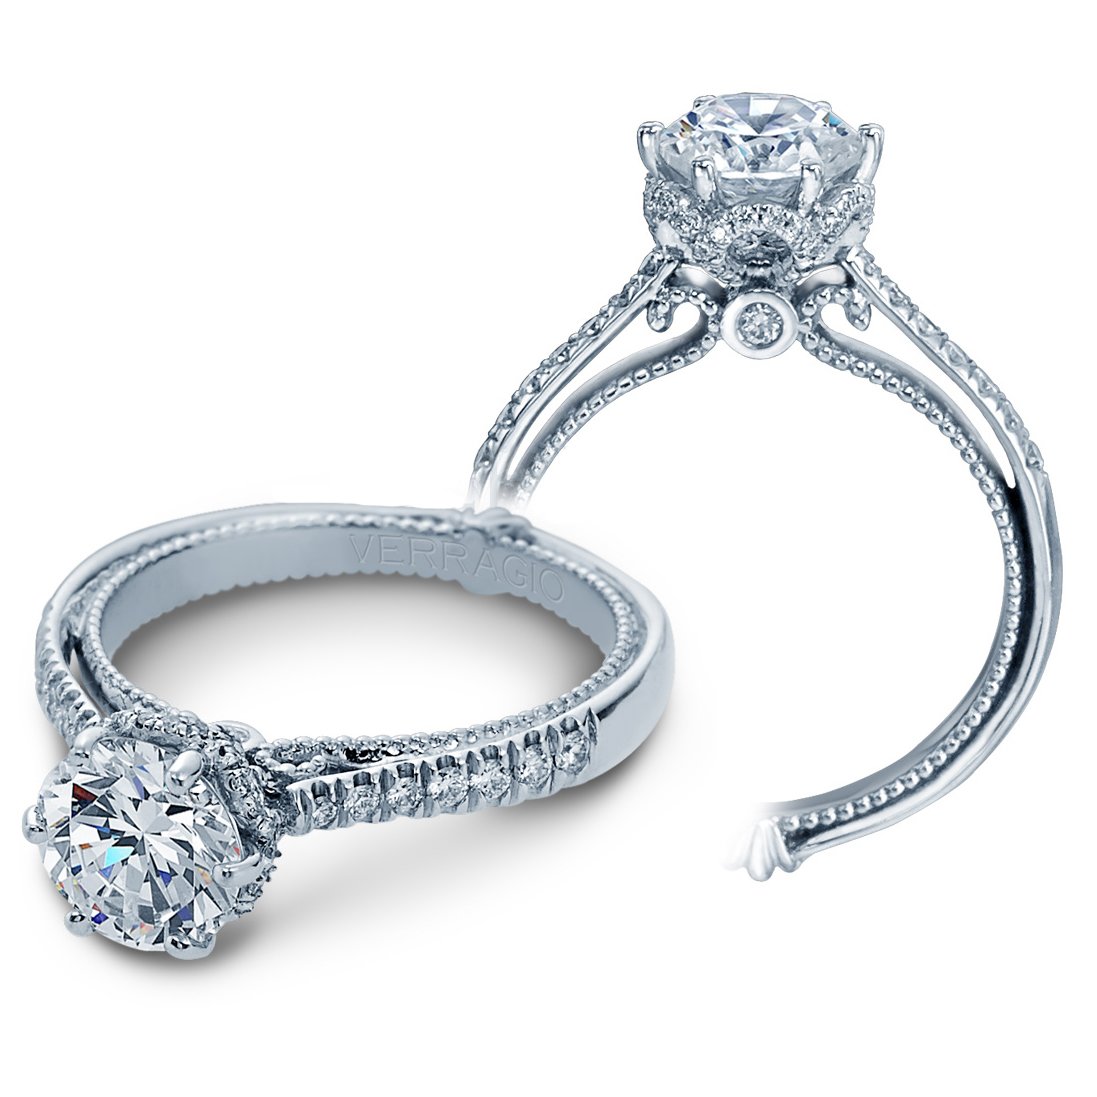 https://www.arthursjewelers.com/content/images/thumbs/Original/Couture-0429DR_1-19300057.jpg